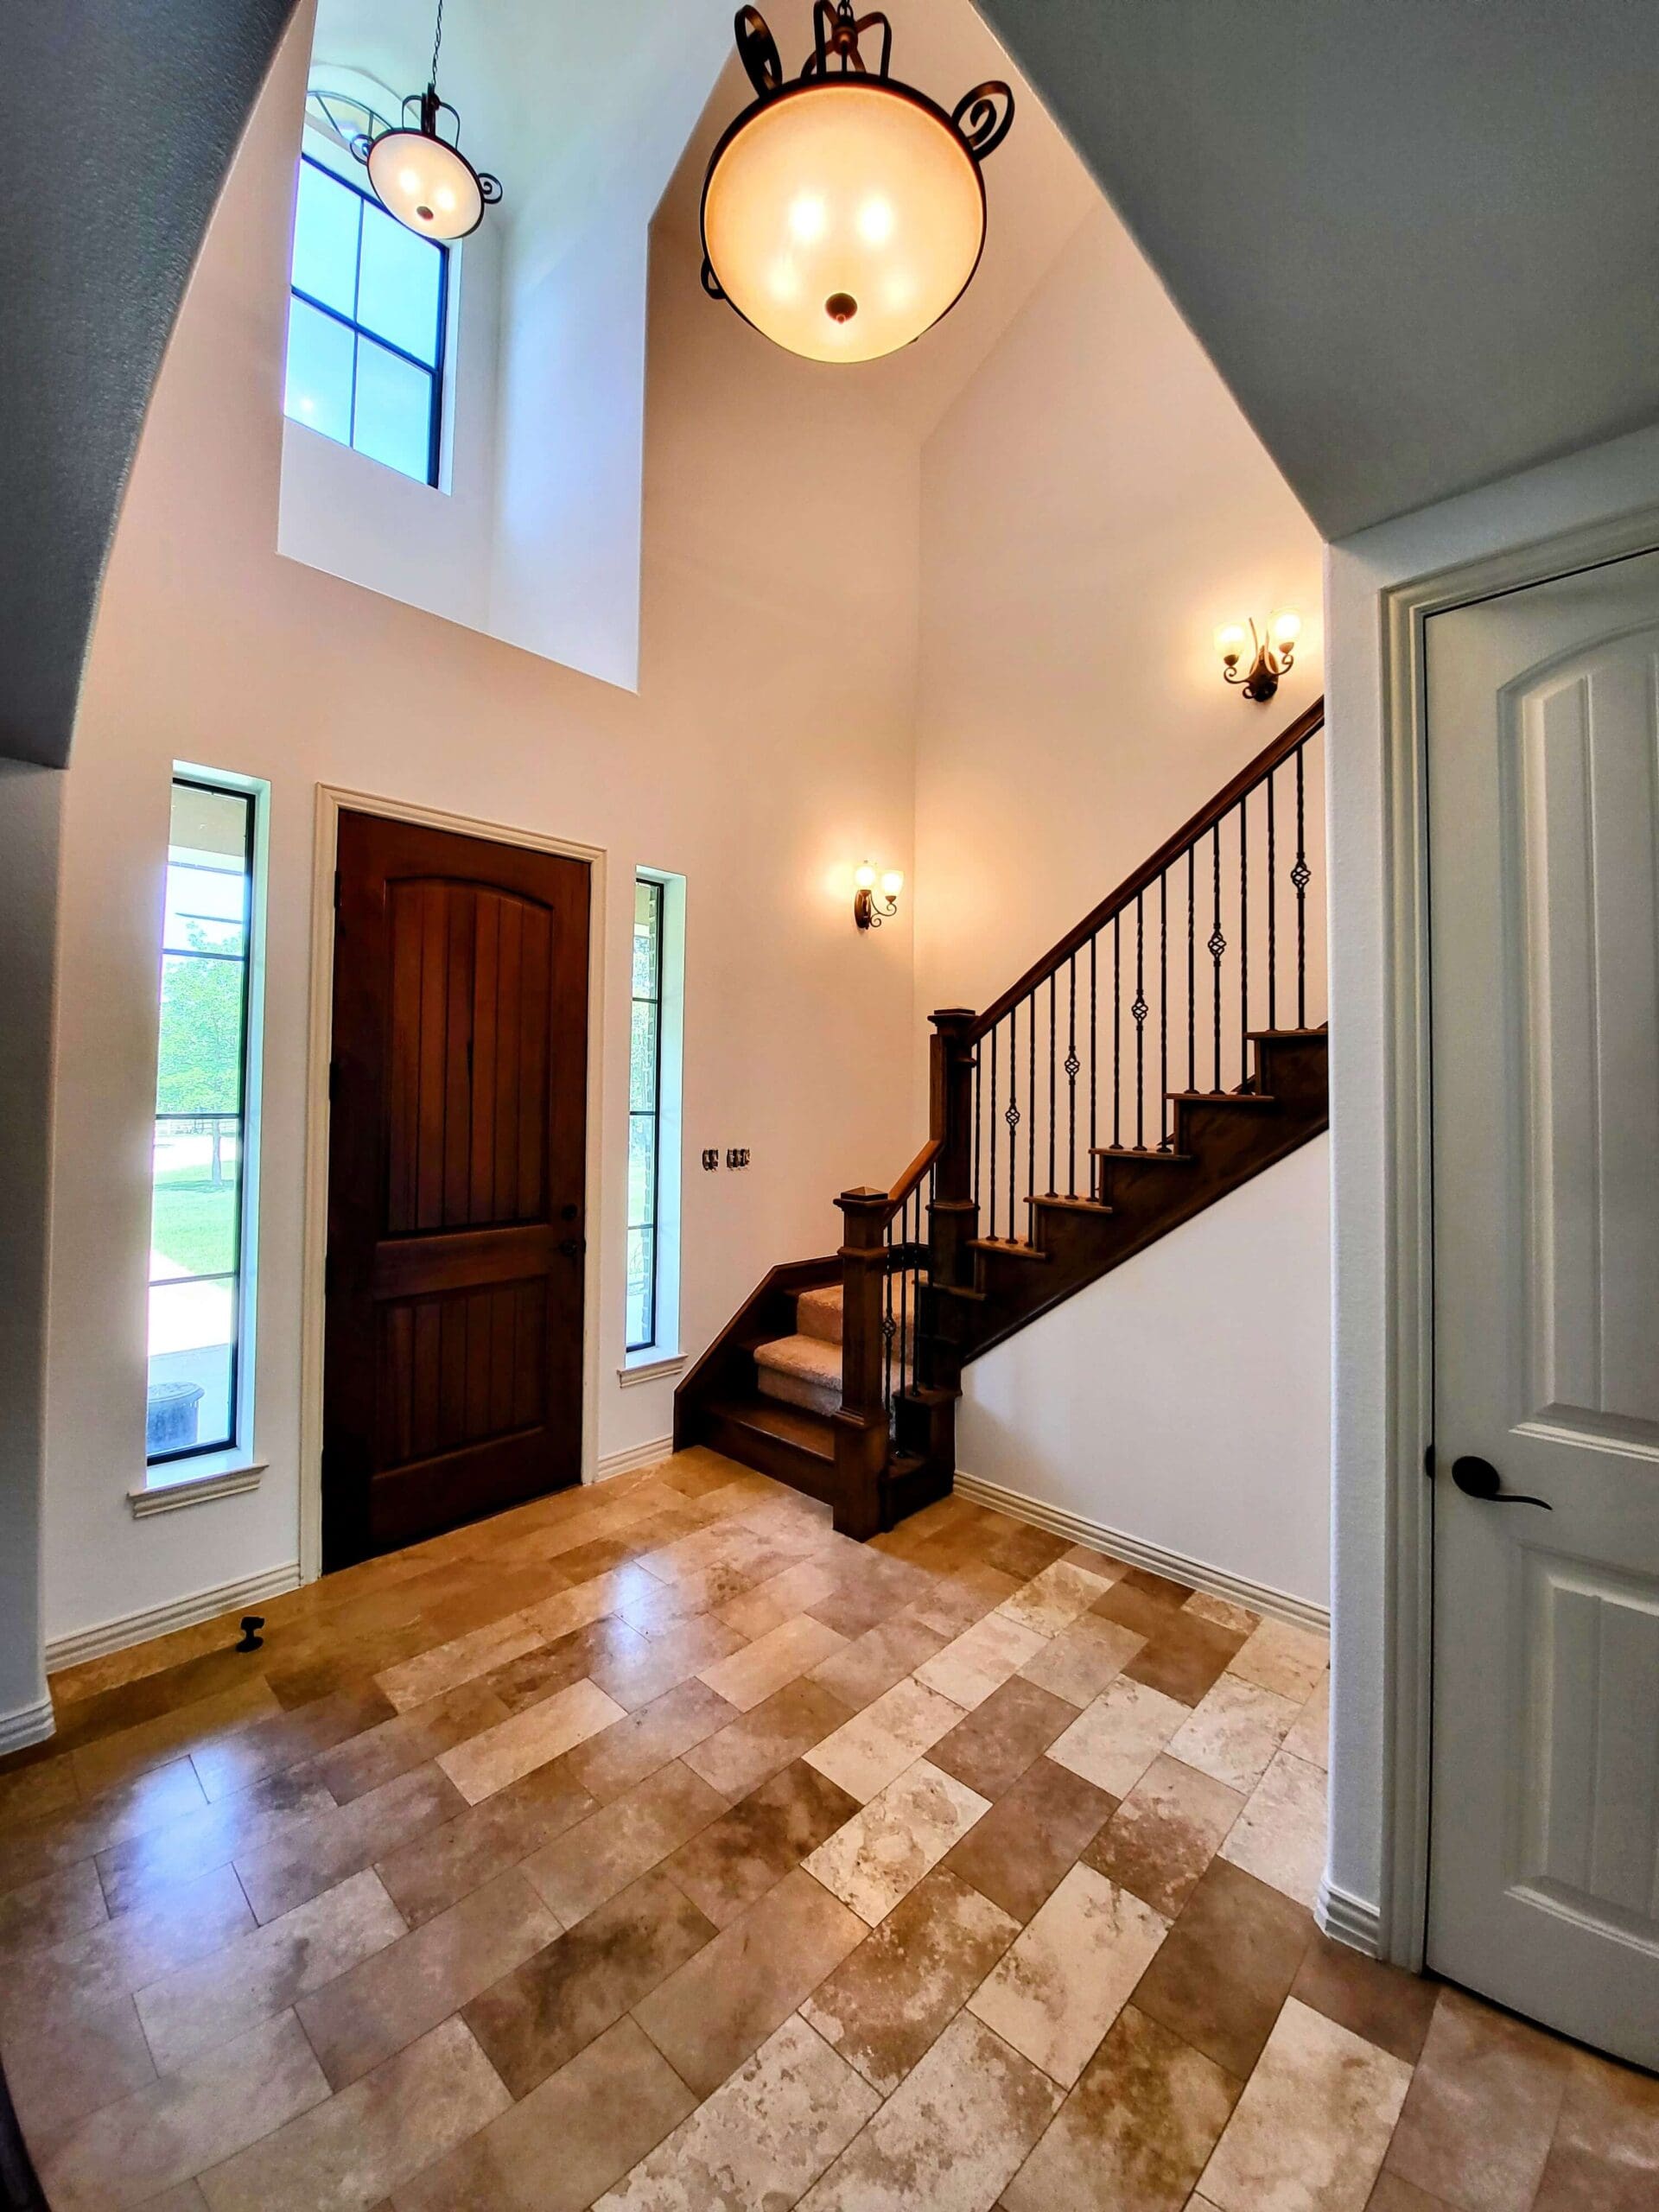 A spacious foyer with a wooden staircase and polished floors, and white painted walls